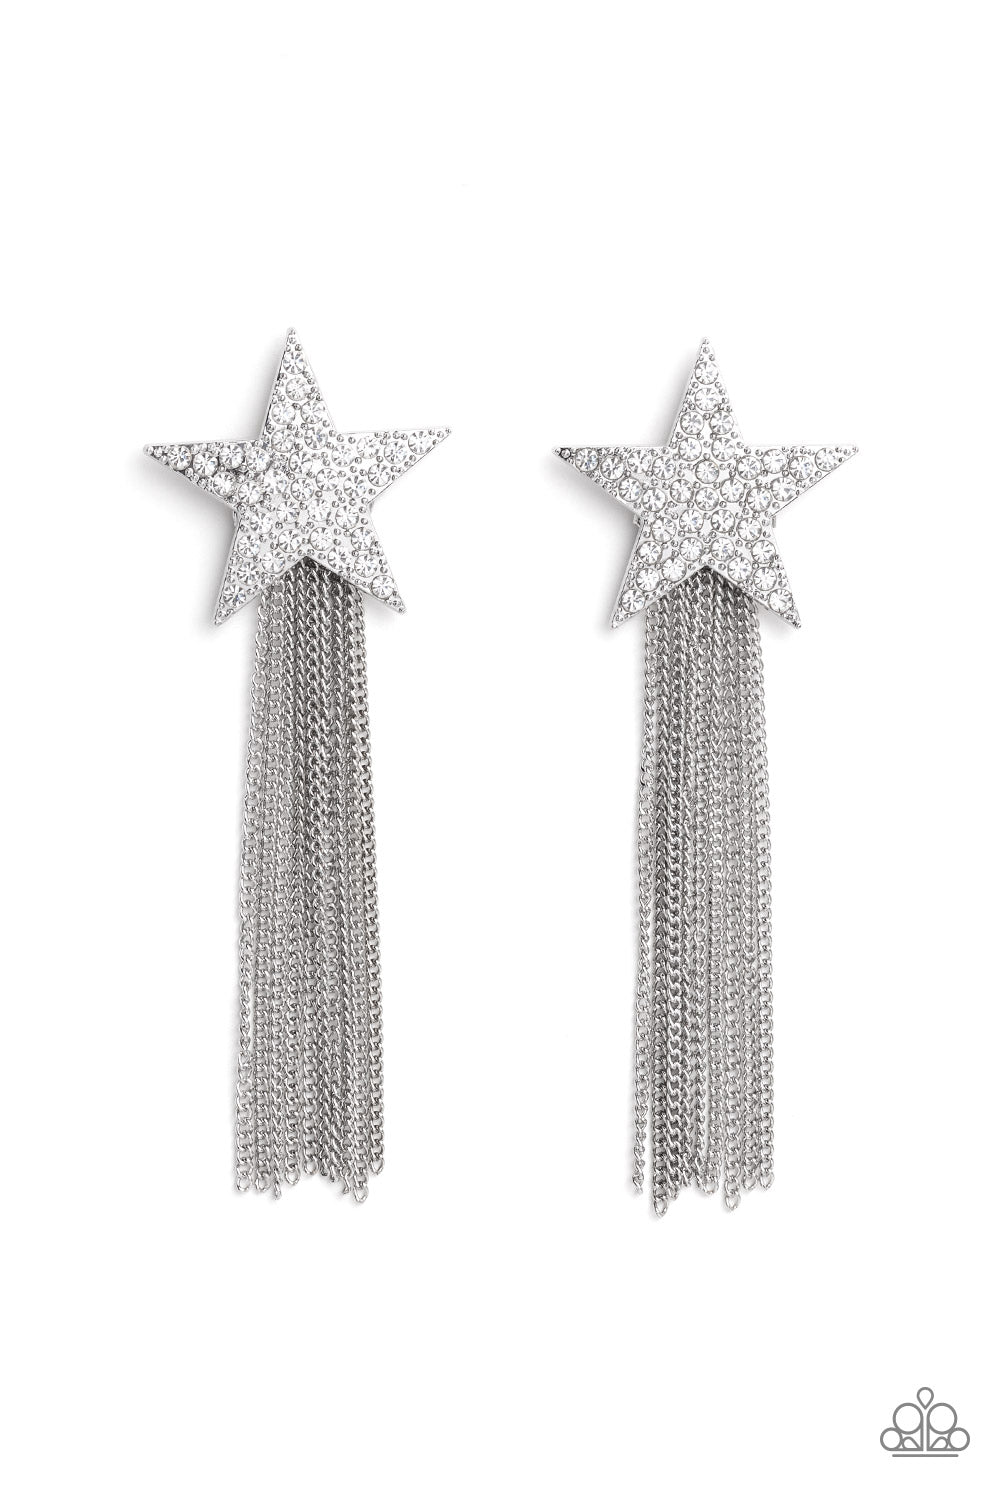 Superstar Solo White Post Earring- Paparazzi Accessories   A curtain of silver chains streams out from the bottom of an oversized silver star encrusted in blinding white rhinestones, resulting in a stellar tassel. Earring attaches to a standard post fitting.  Sold as one pair of post earrings.  December 2022 Life of the Party!